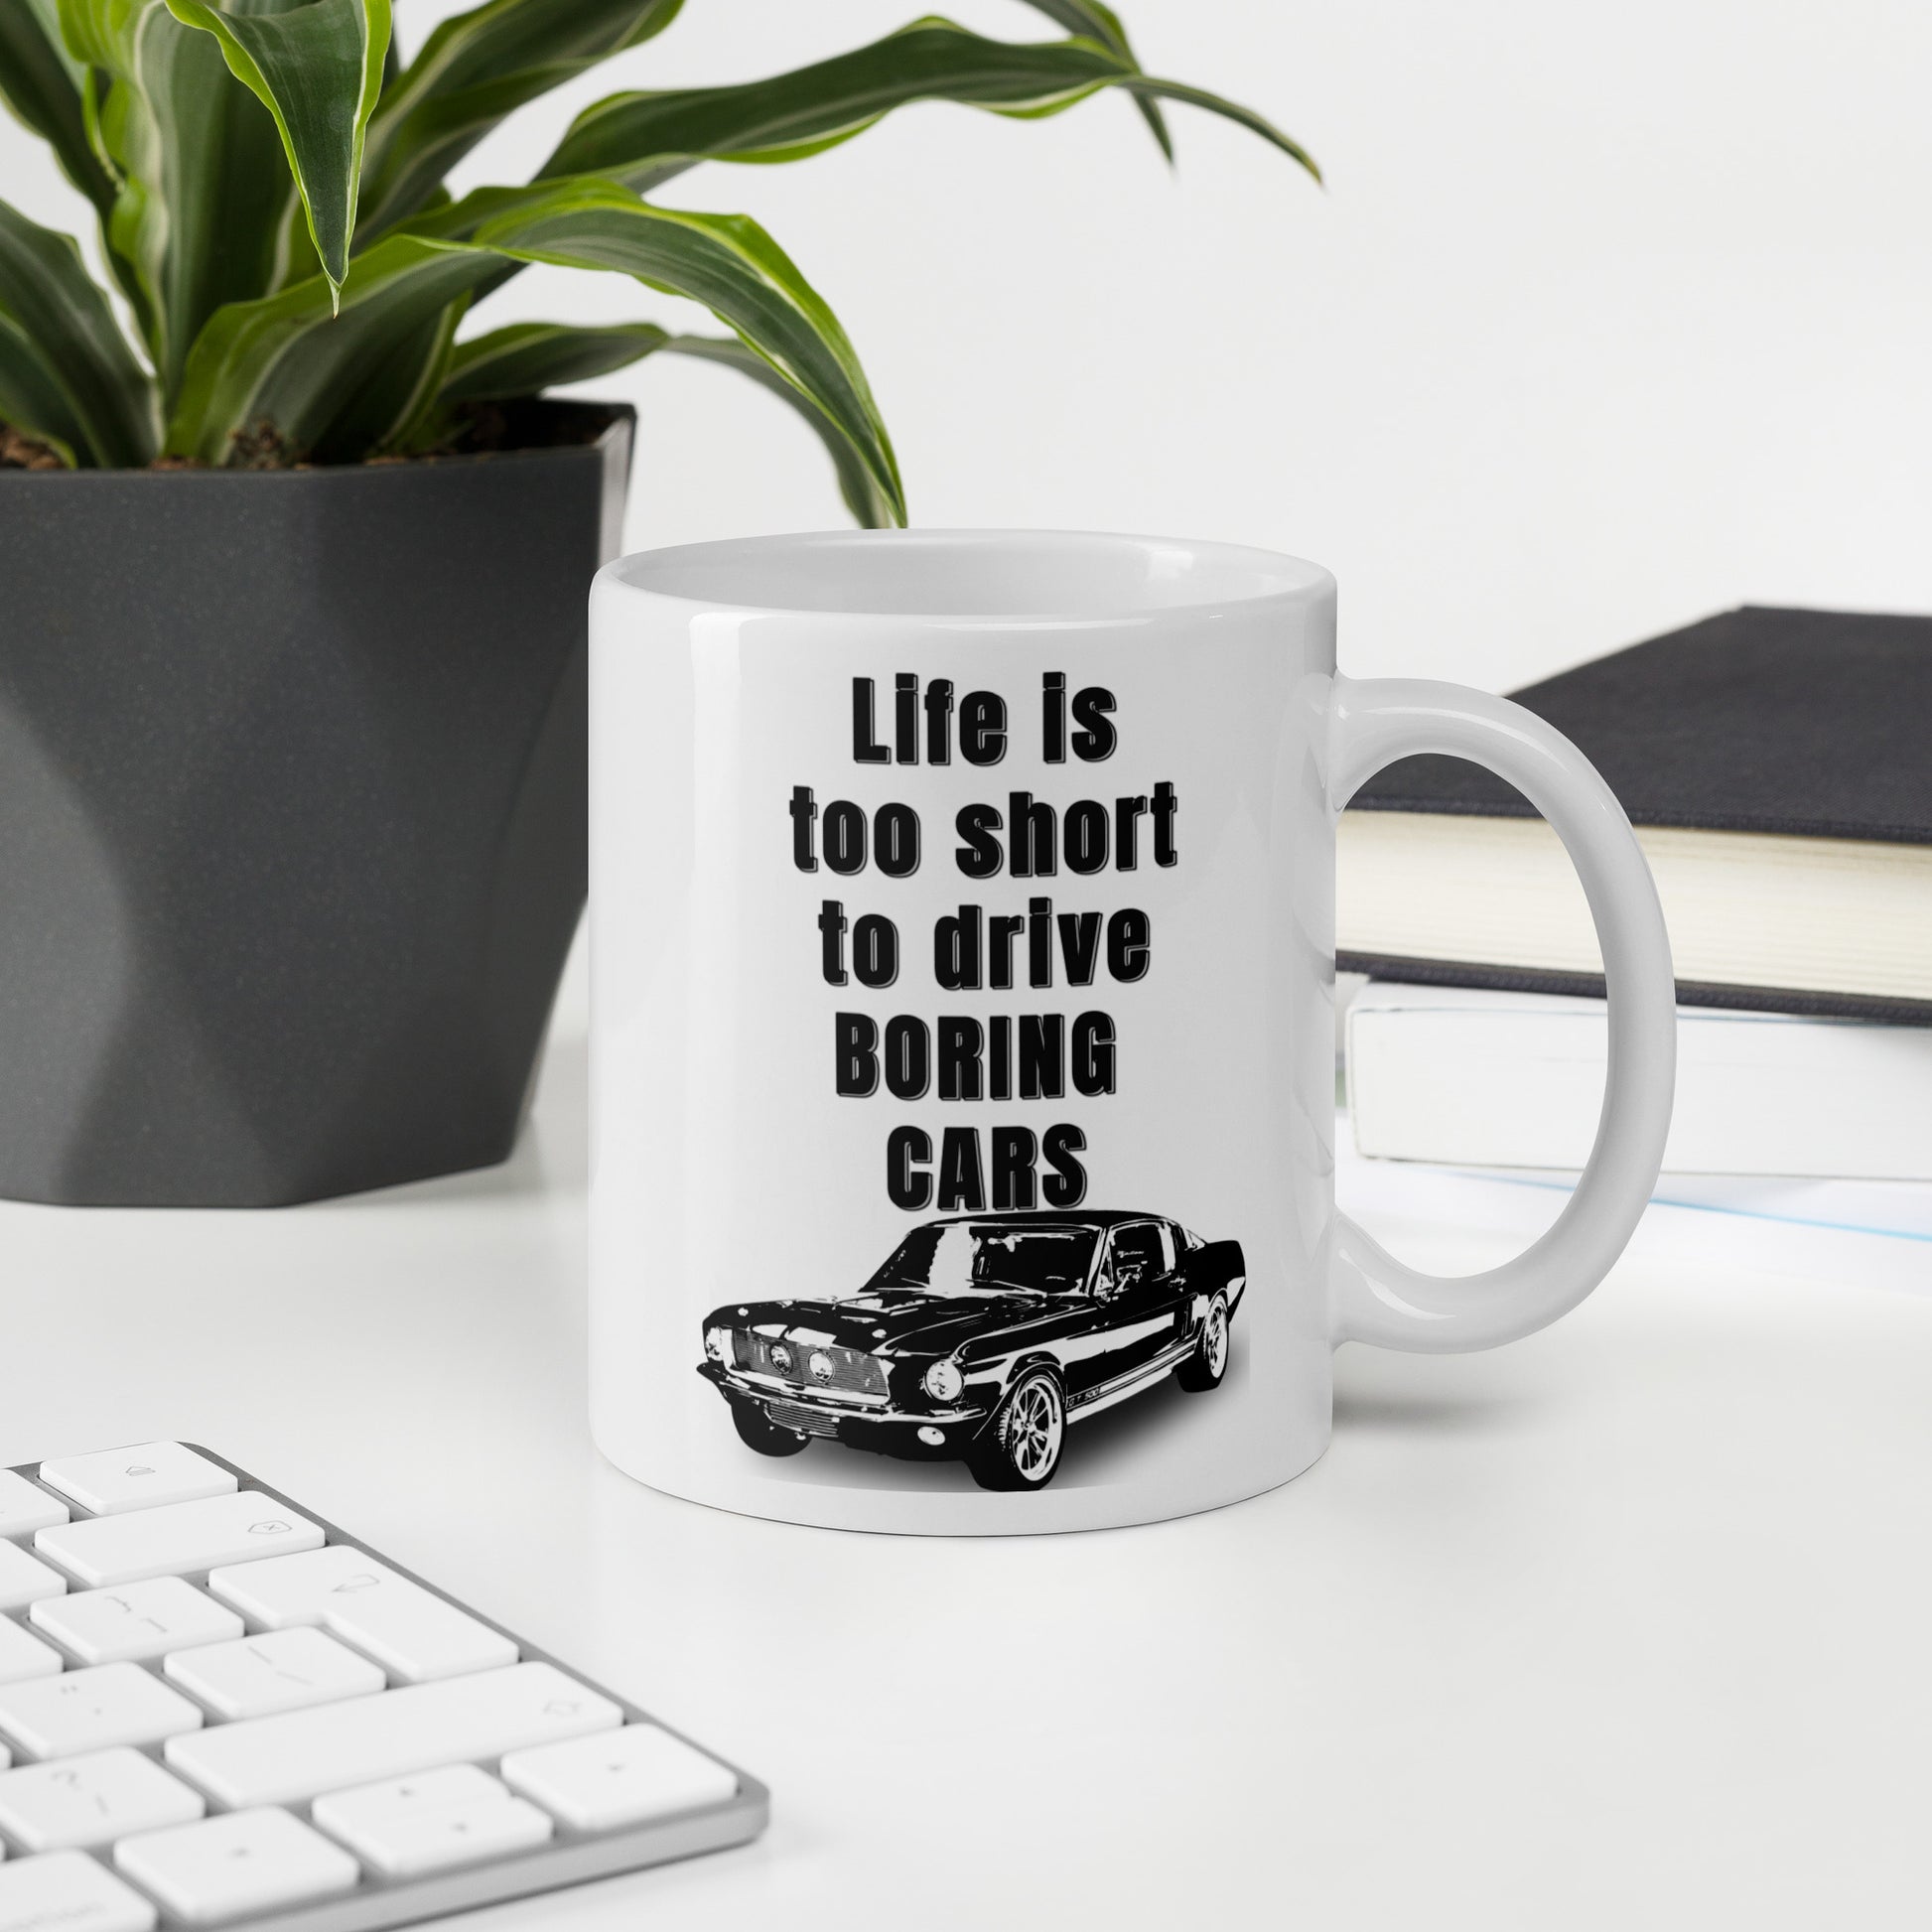 Life is too short to drive BORING cars 1967 Ford-Shelby GT 500 Mug 1967 ford shelby Caffeine classic car Coffee Addiction Coffee Beans Coffee Break Coffee Humor Coffee is Life Coffee Lover Coffee Shop Coffee Snob Coffee Time Espresso Funny Quotes Humor Java Keep Calm and Drink Coffee Latte Mocha Morning muscle car Mustang Procaffeinating shelby Wordplay